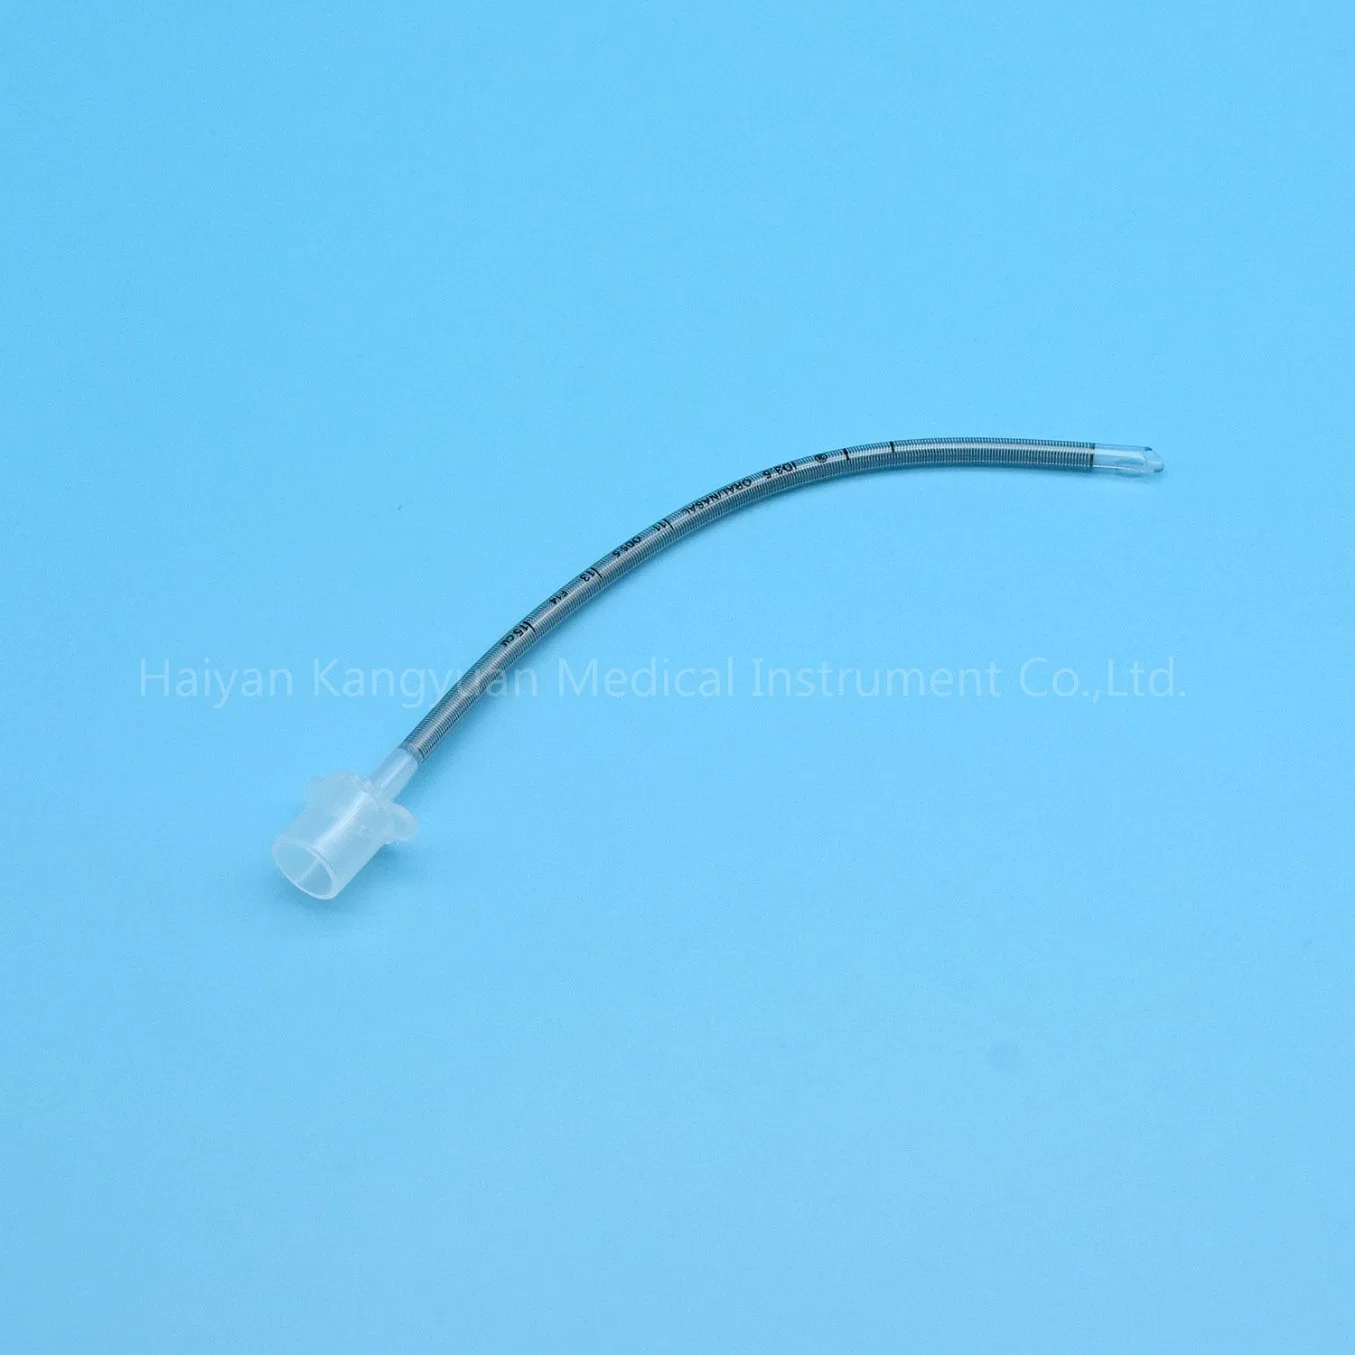 Flexible Armored/Reinforced Endotracheal Tube PVC Manufacturer Medical Supply Disposable Medical Materials Medical Tube Flexible Soft Tip